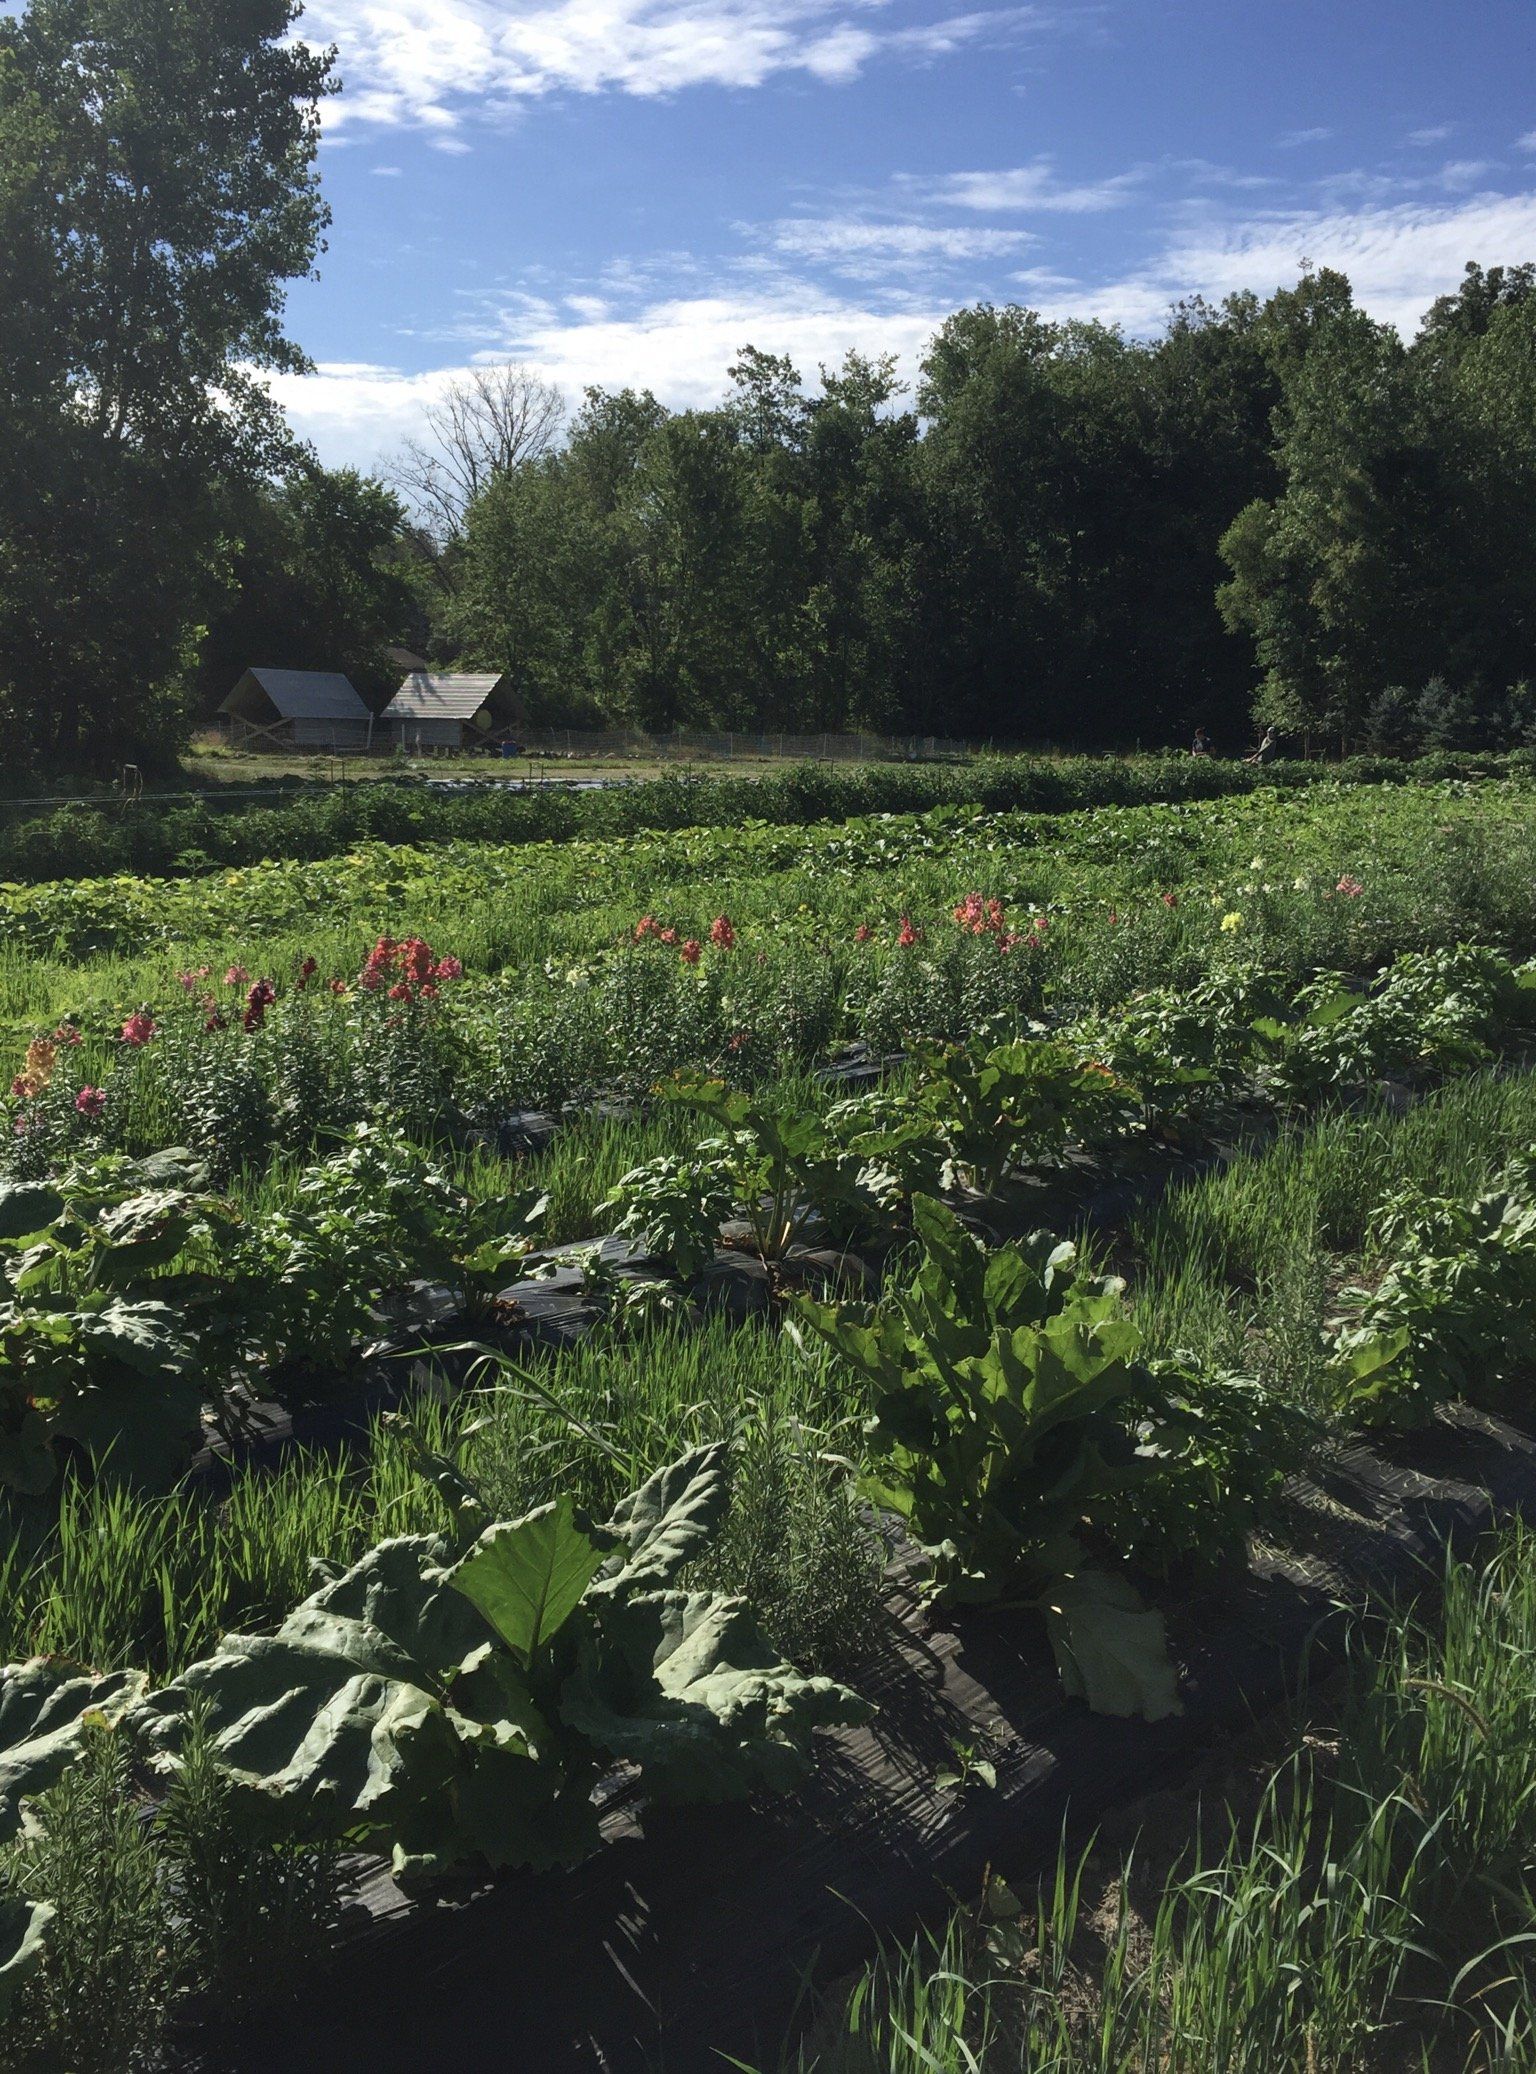 Previous Happening: Farm Happenings for August 5, 2020